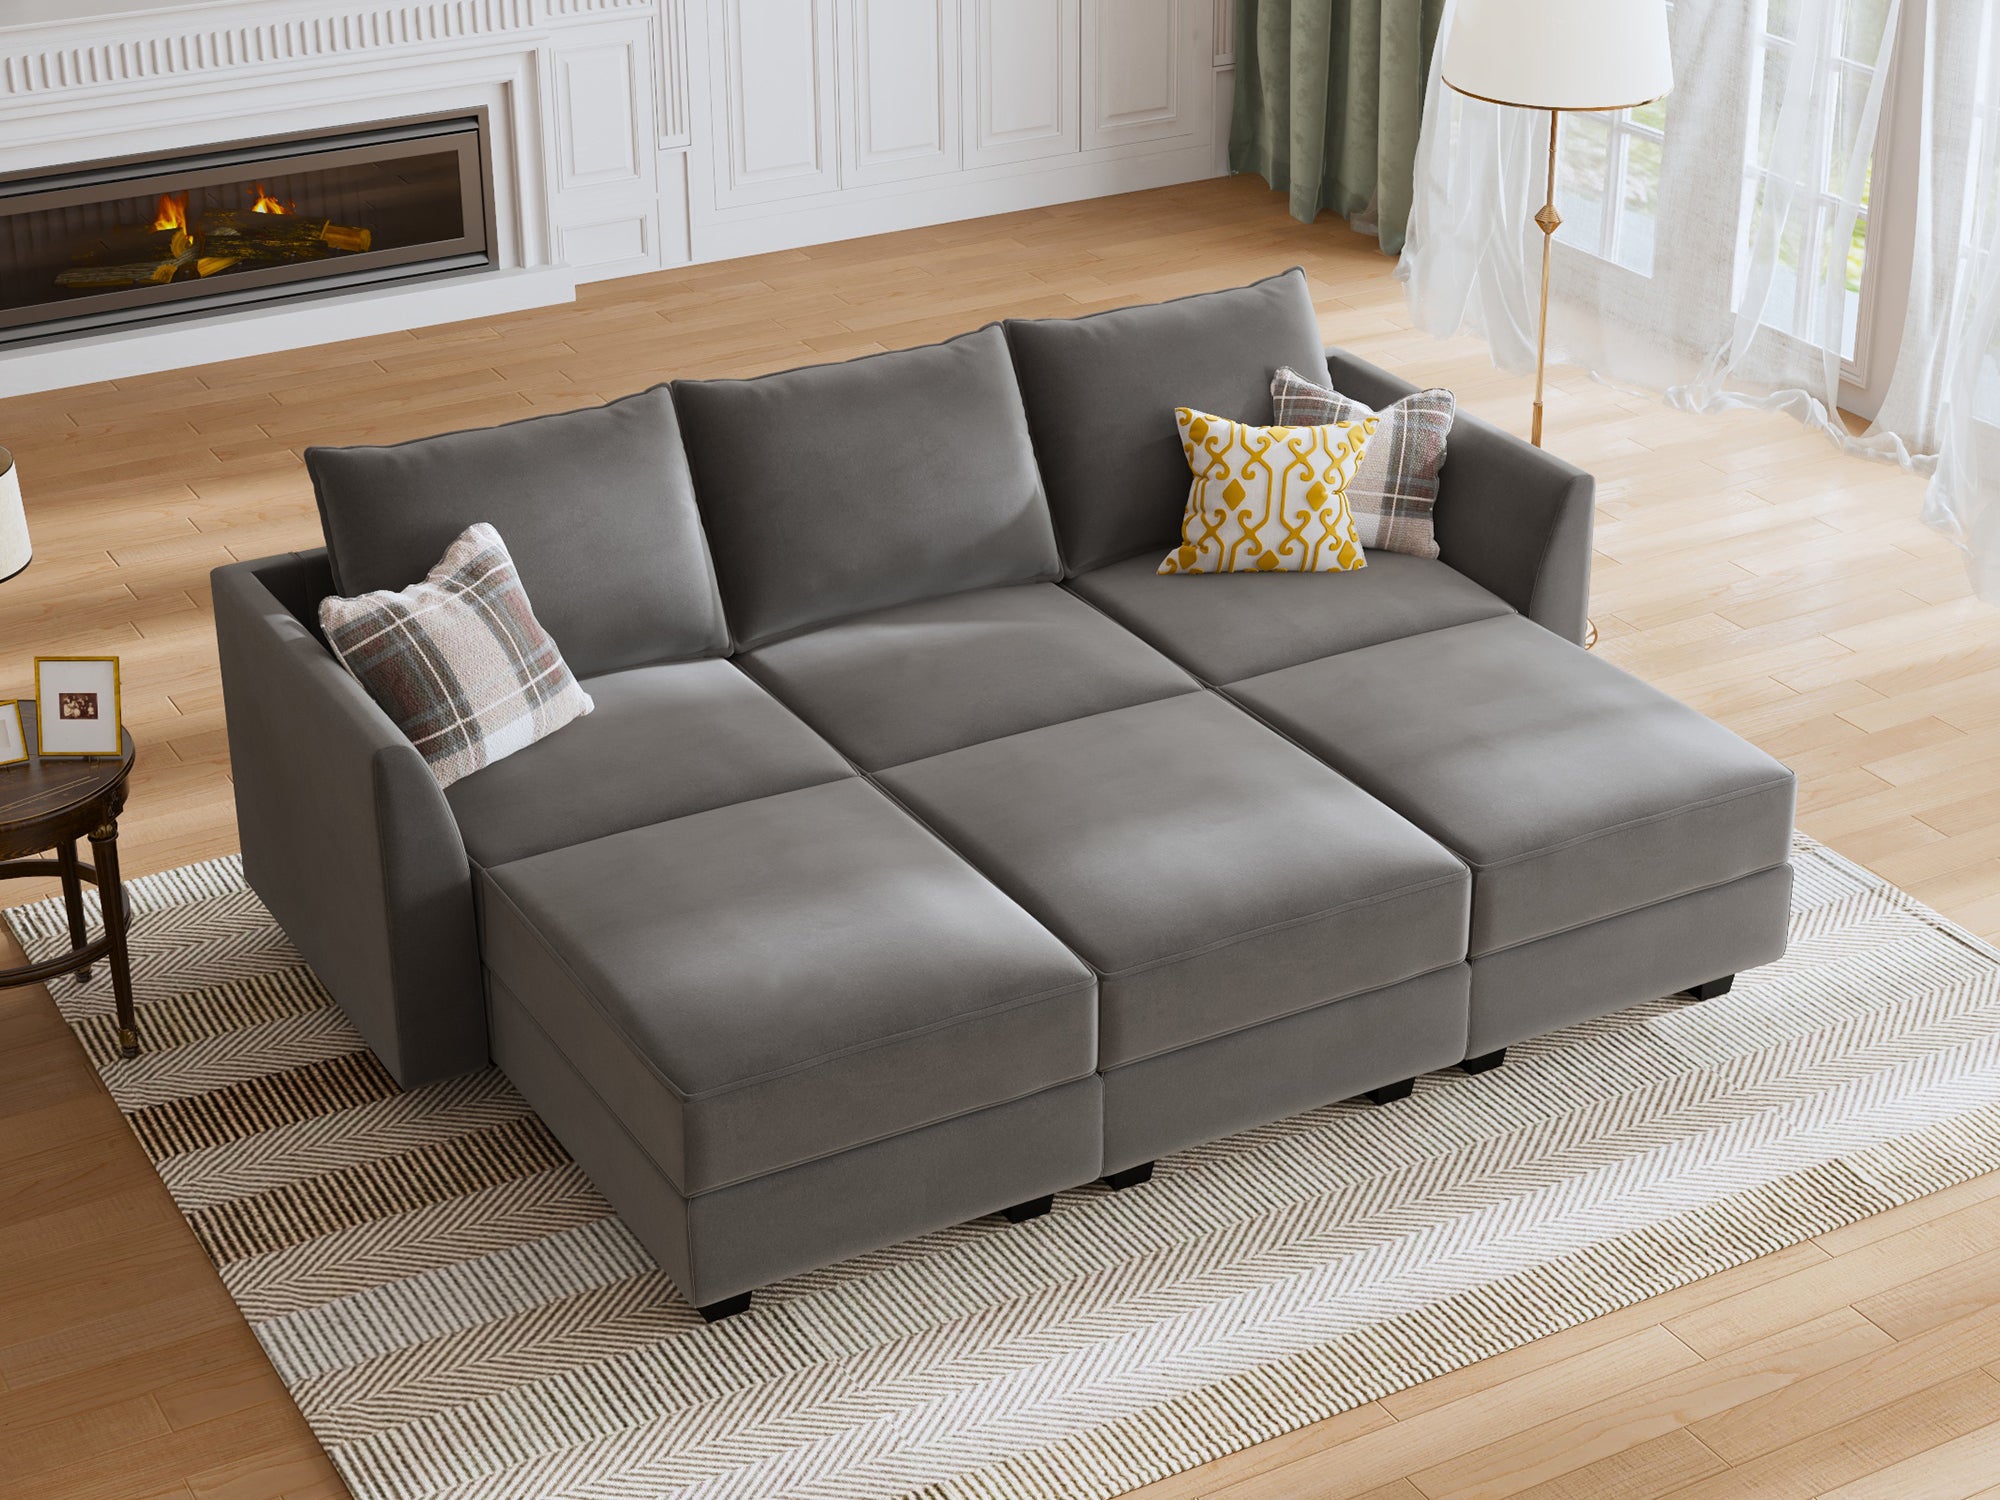 HONBAY Velvet 3-Seat Modular Sofa Couch with Storage & Convertible Sofa Bed